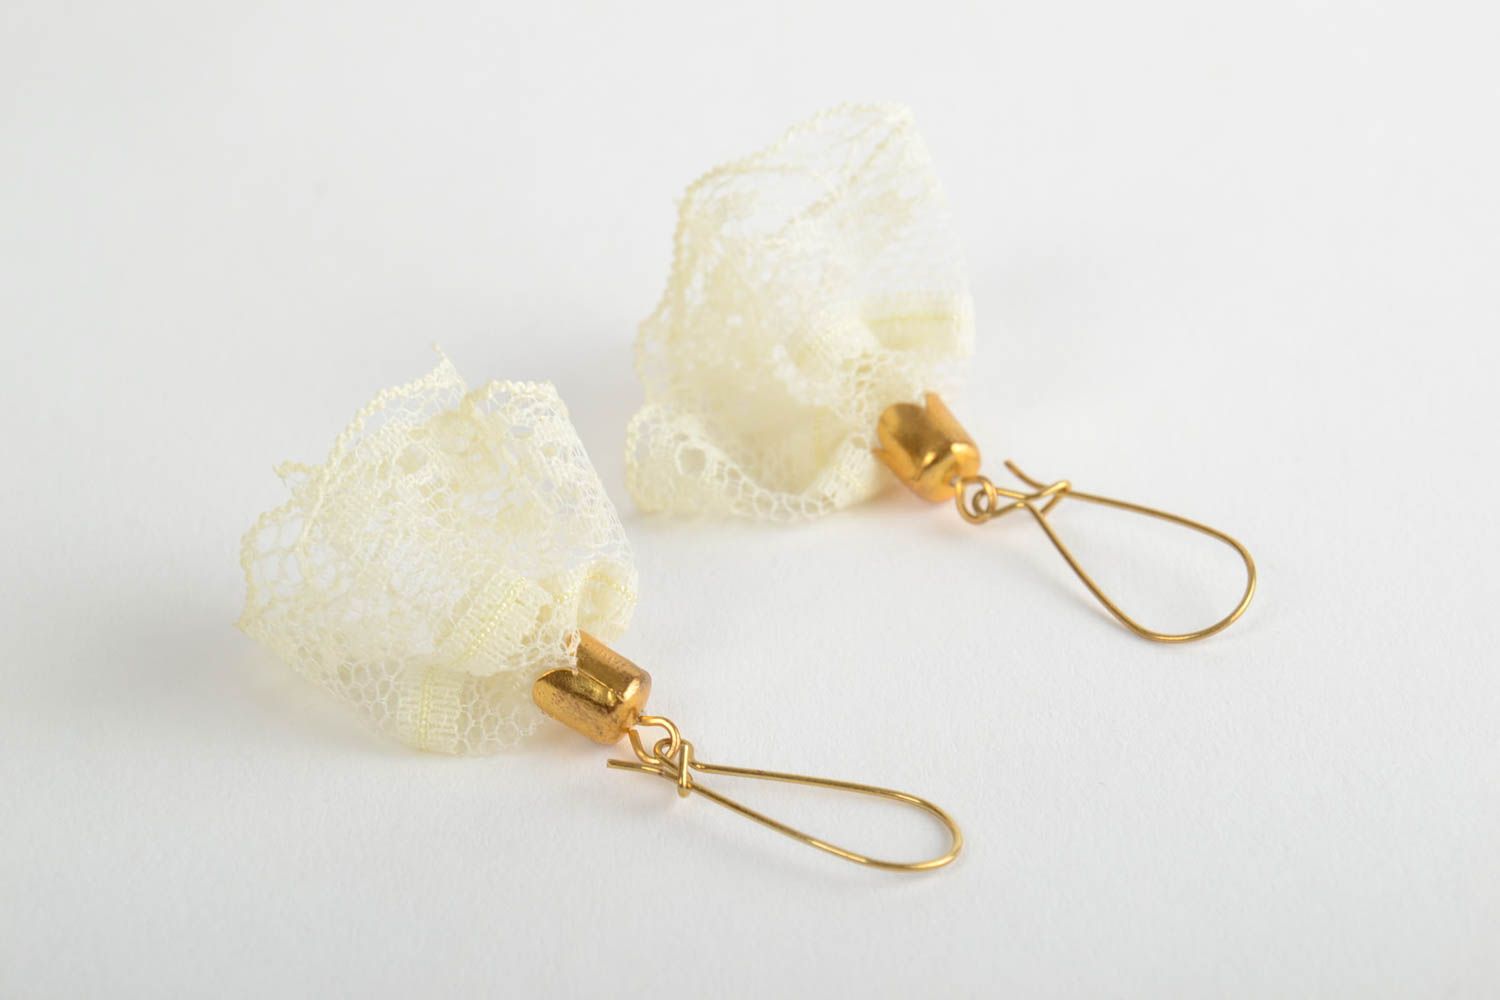 Handmade light festive lace dangling earrings with golden colored ear wires photo 4